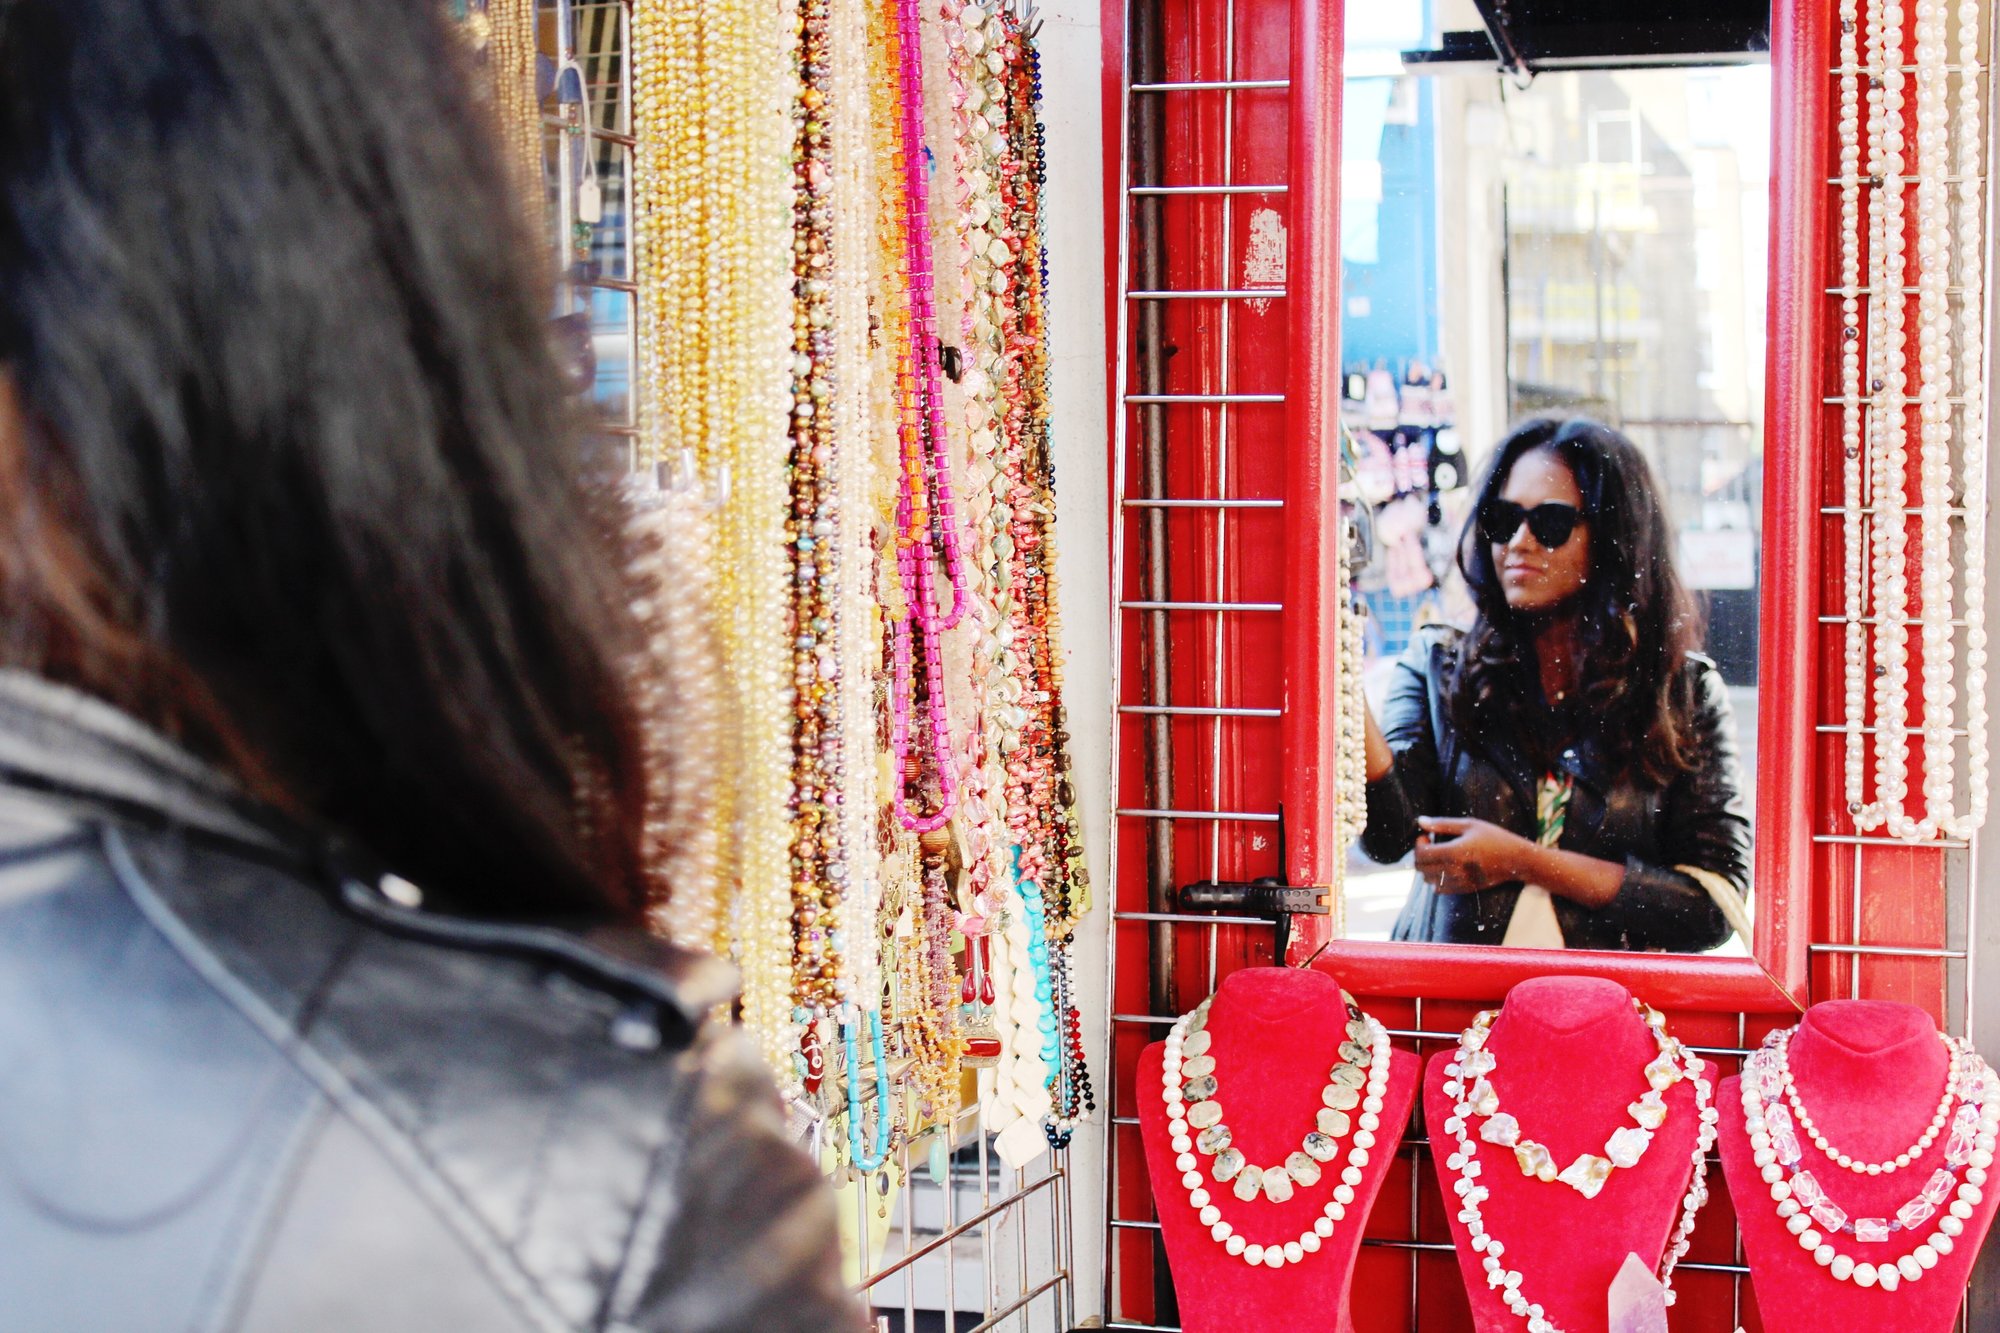 Sachini wearing a black leather jacket looking in a mirror of a street shop